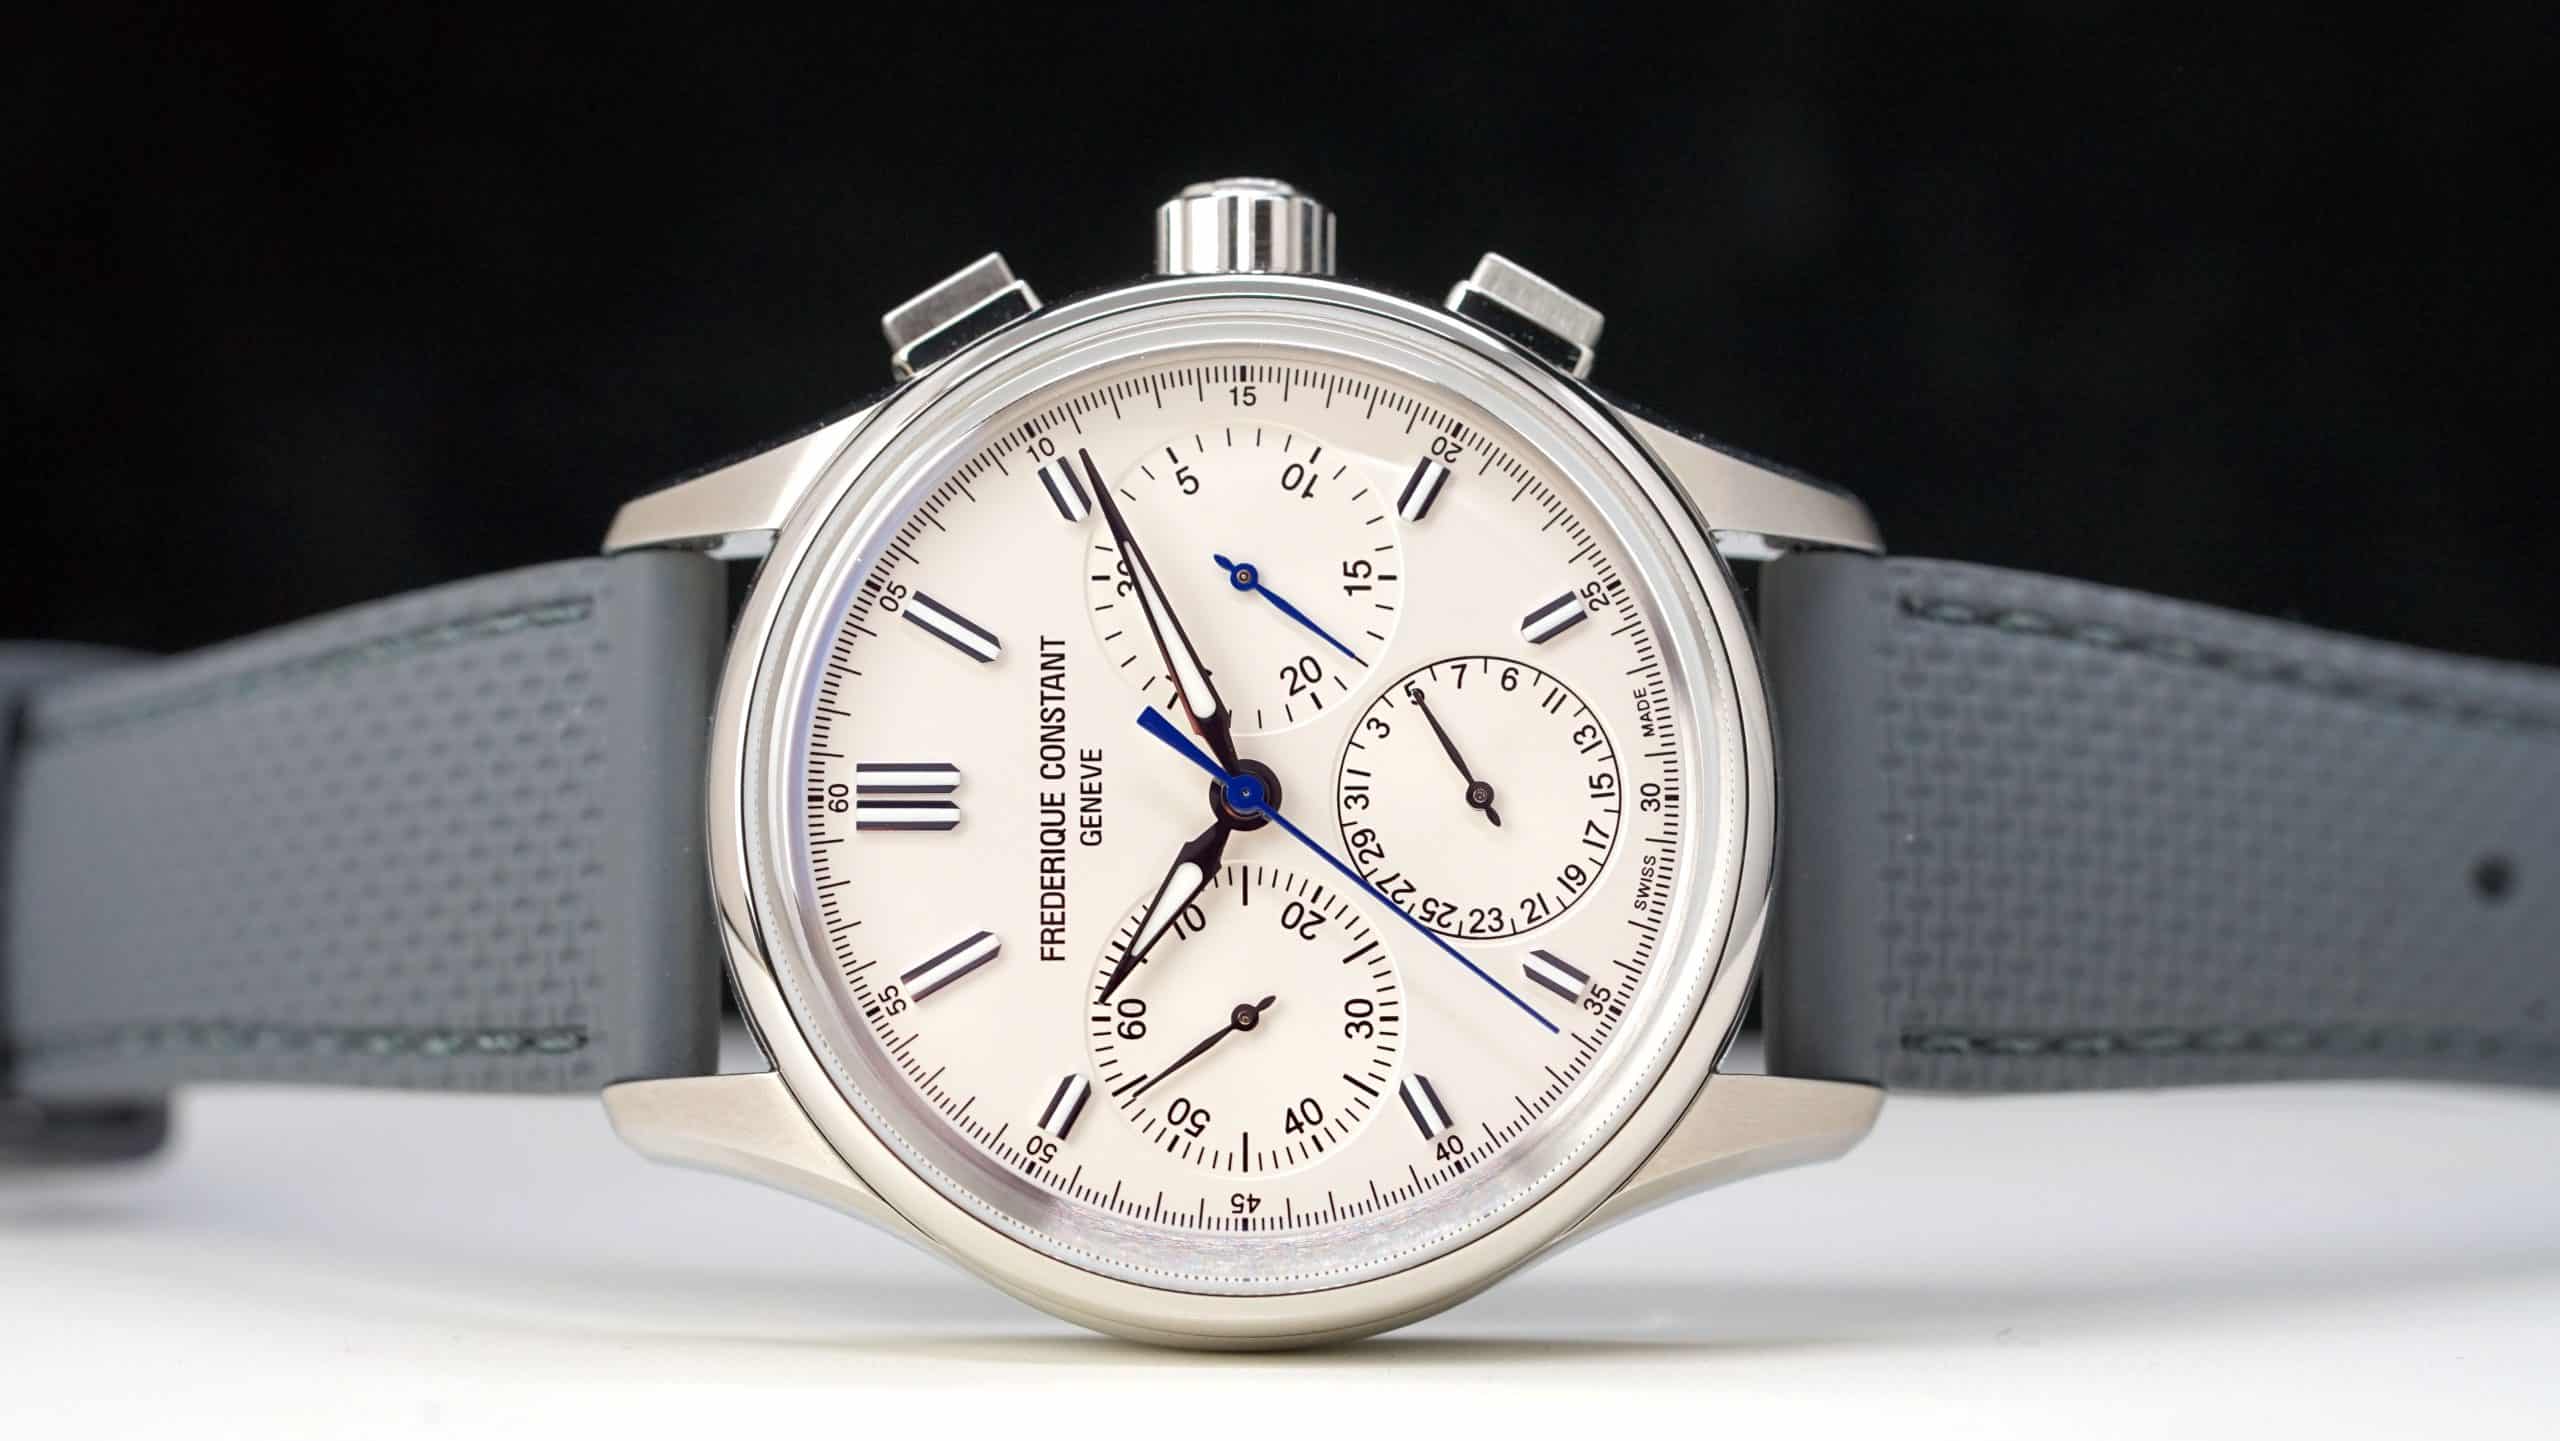 The history behind the Flyback Chronograph Manufacture Complication